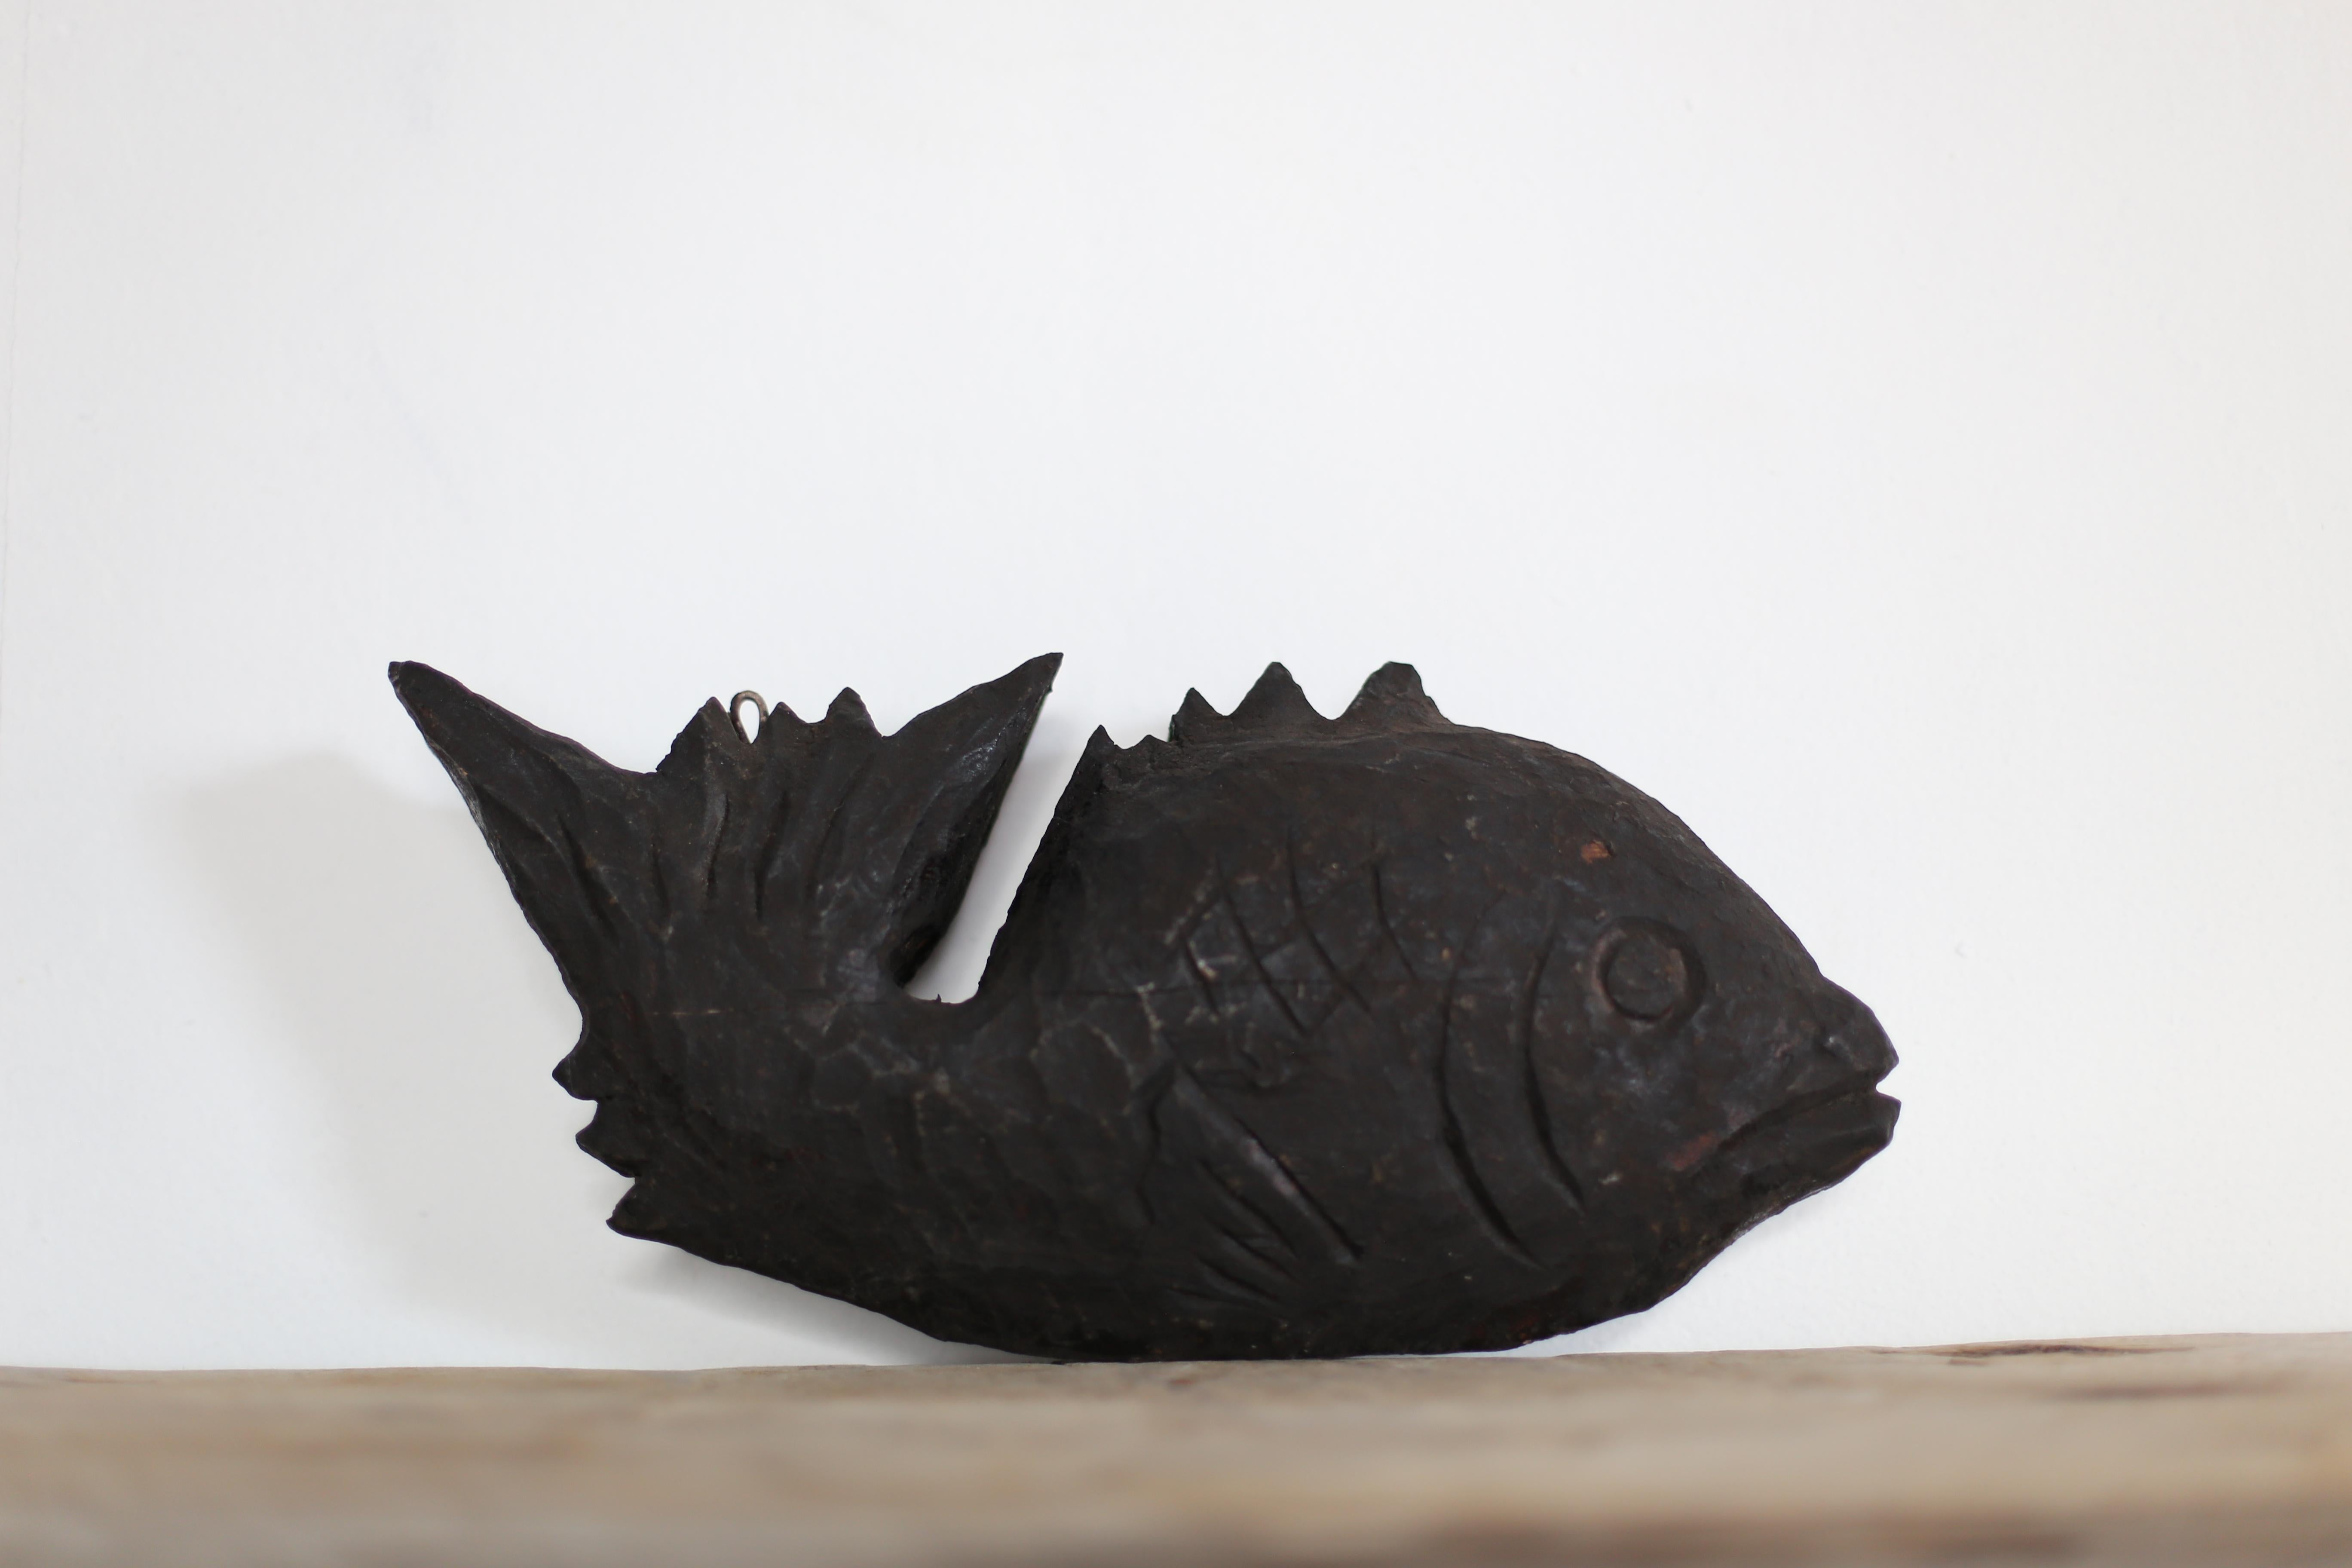 This is a very old Japanese wood carving of a fish.
It is a wood carving from the Meiji period (1860s-1900s).
It is carved from cedar wood.

This wood carving is attached to a free hook used in hearths.
Fish are considered lucky charms, as they